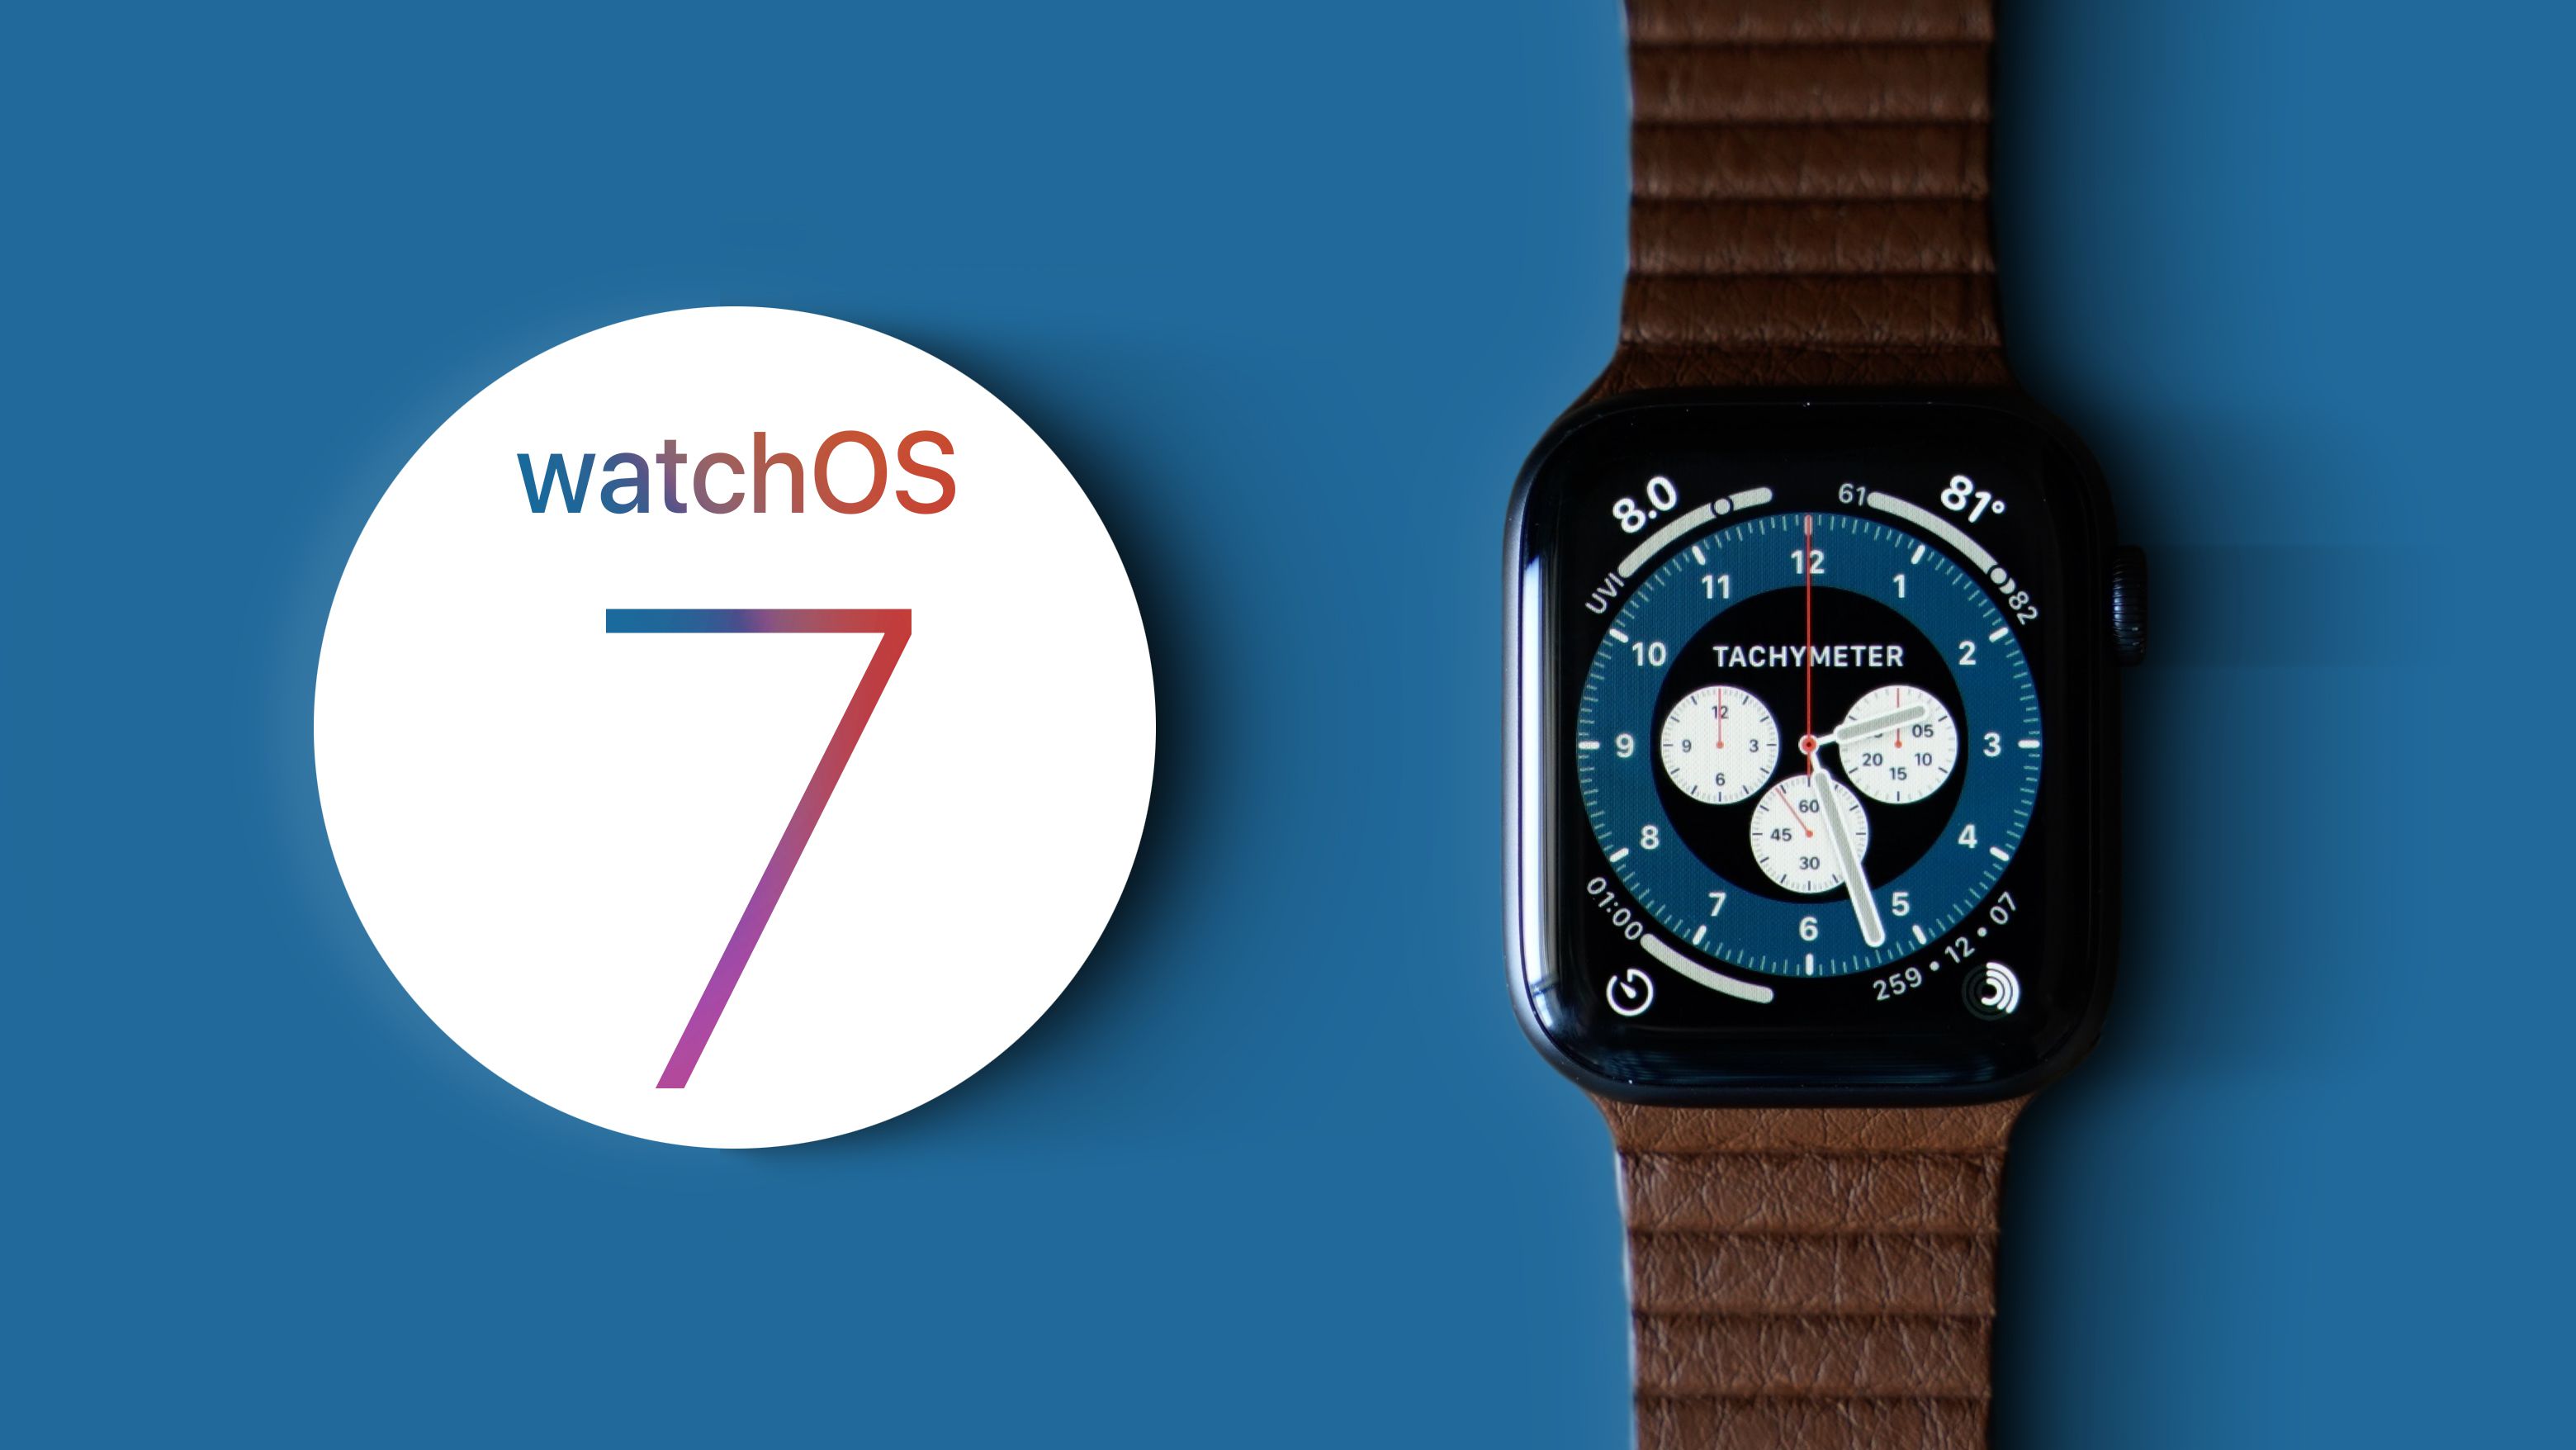 watchOS 7 Removes Force Touch Support From Your Apple Watch, Here's Everything That's Changed - MacRumors